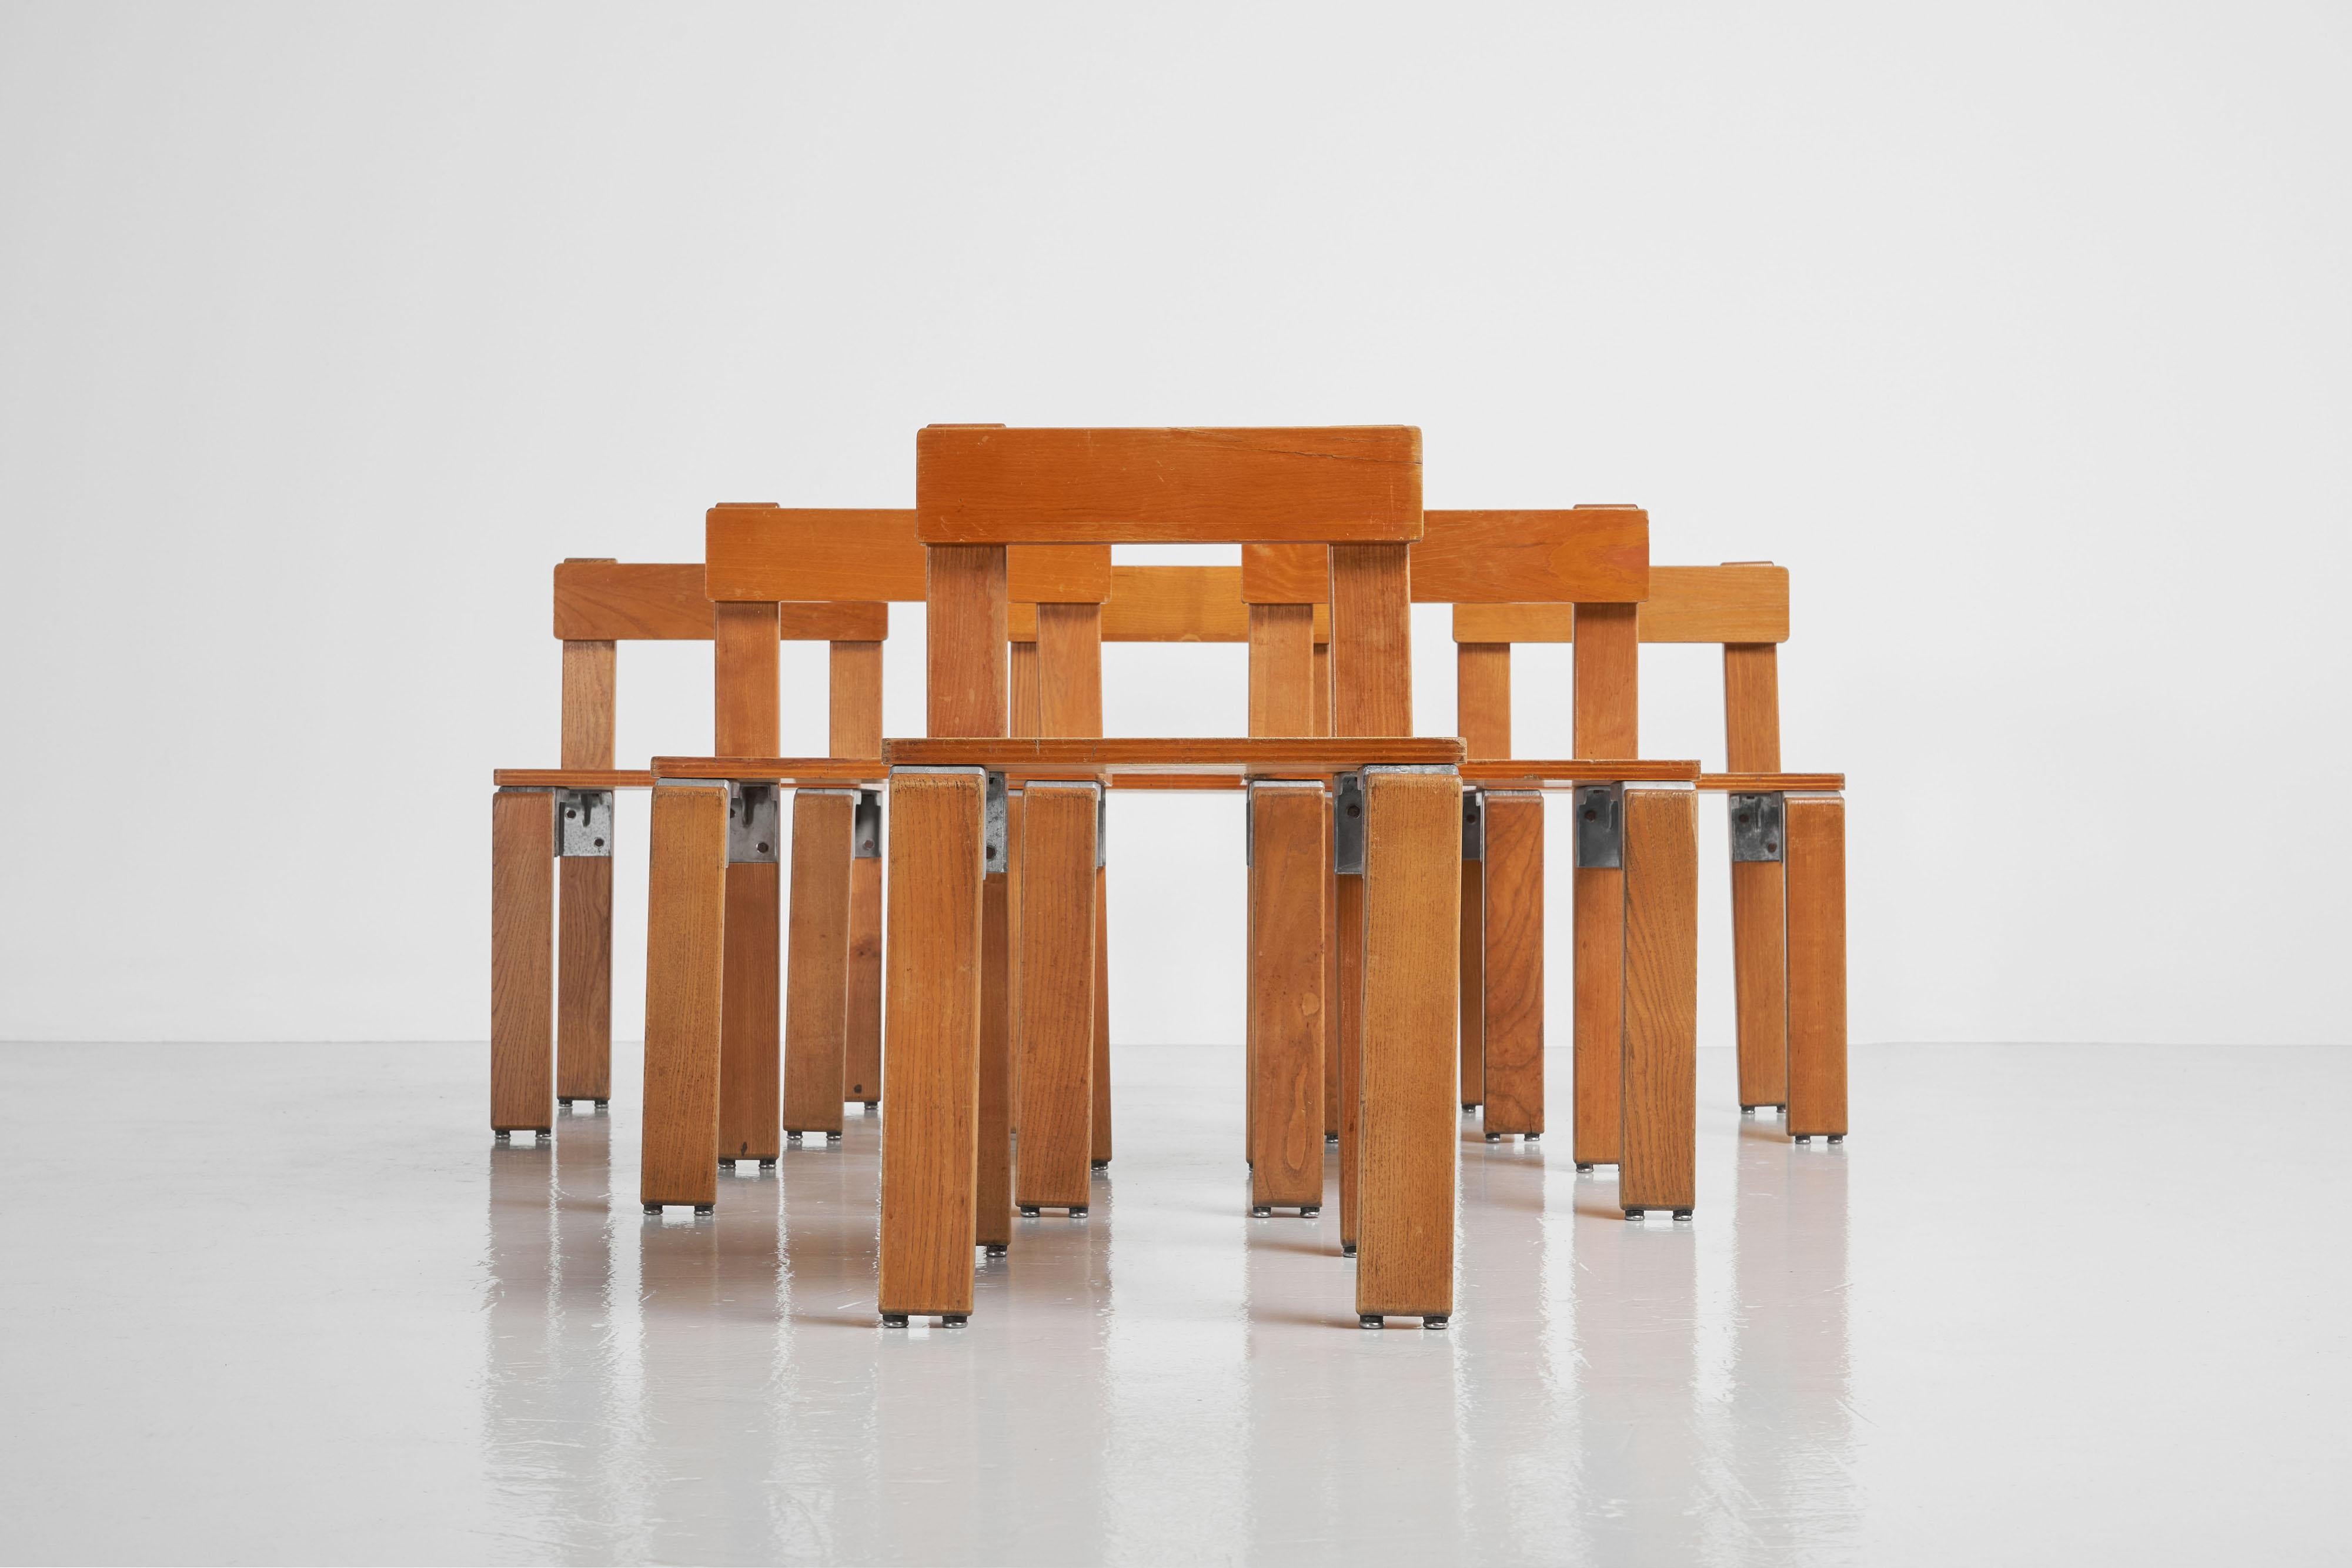 A rare set of 6 industrial designed chairs by architect Georges Candilis (1913-1995) and manufactured by Sentou, France 1968. These chairs were part of a design by Candilis for the residence “Les Carrats” in Port Leucatein France. The Carrats